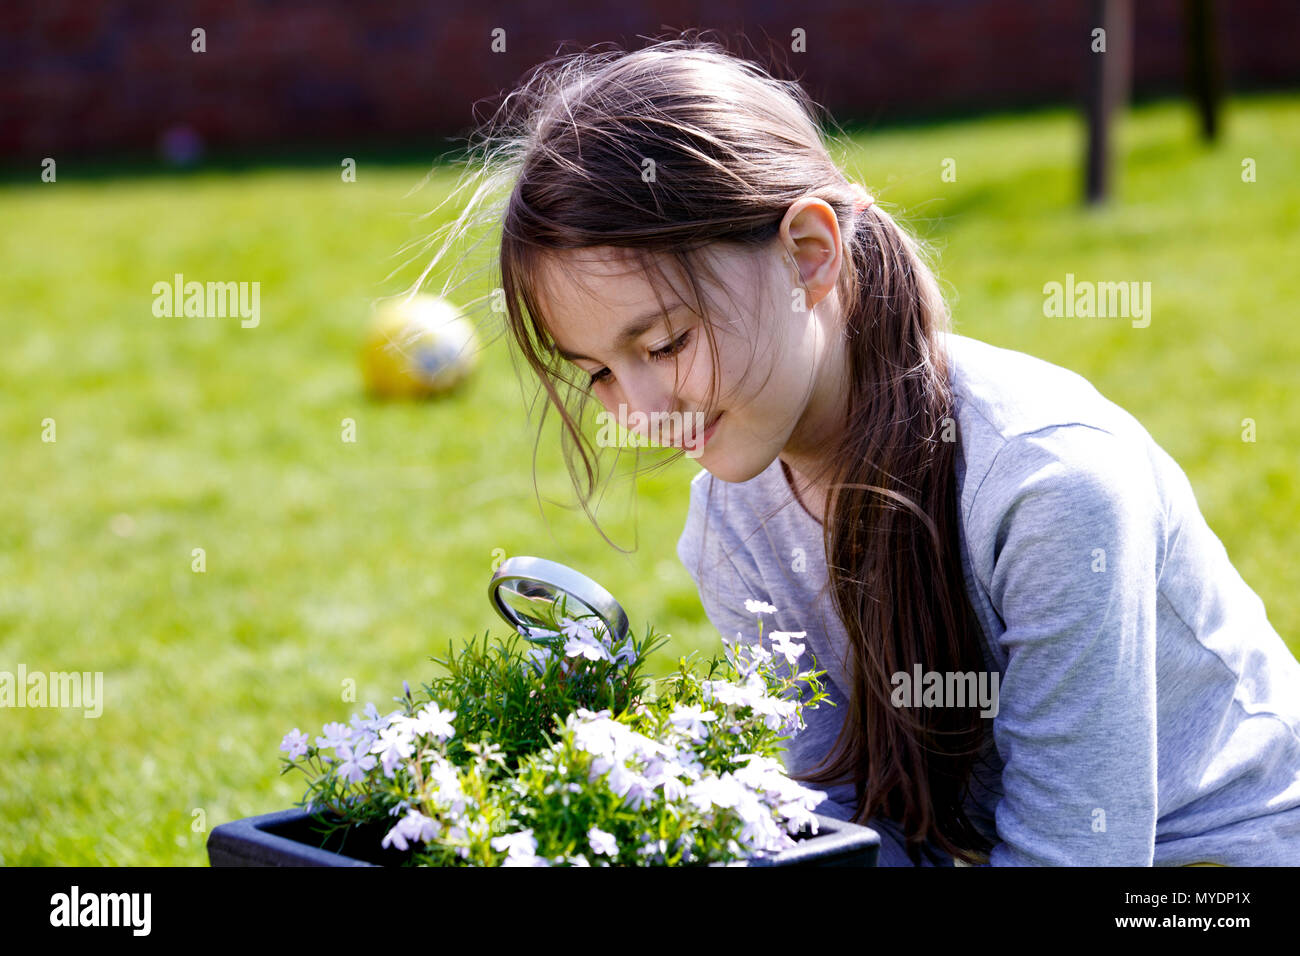 Girl examining a plant with a magnifying glass. Stock Photo